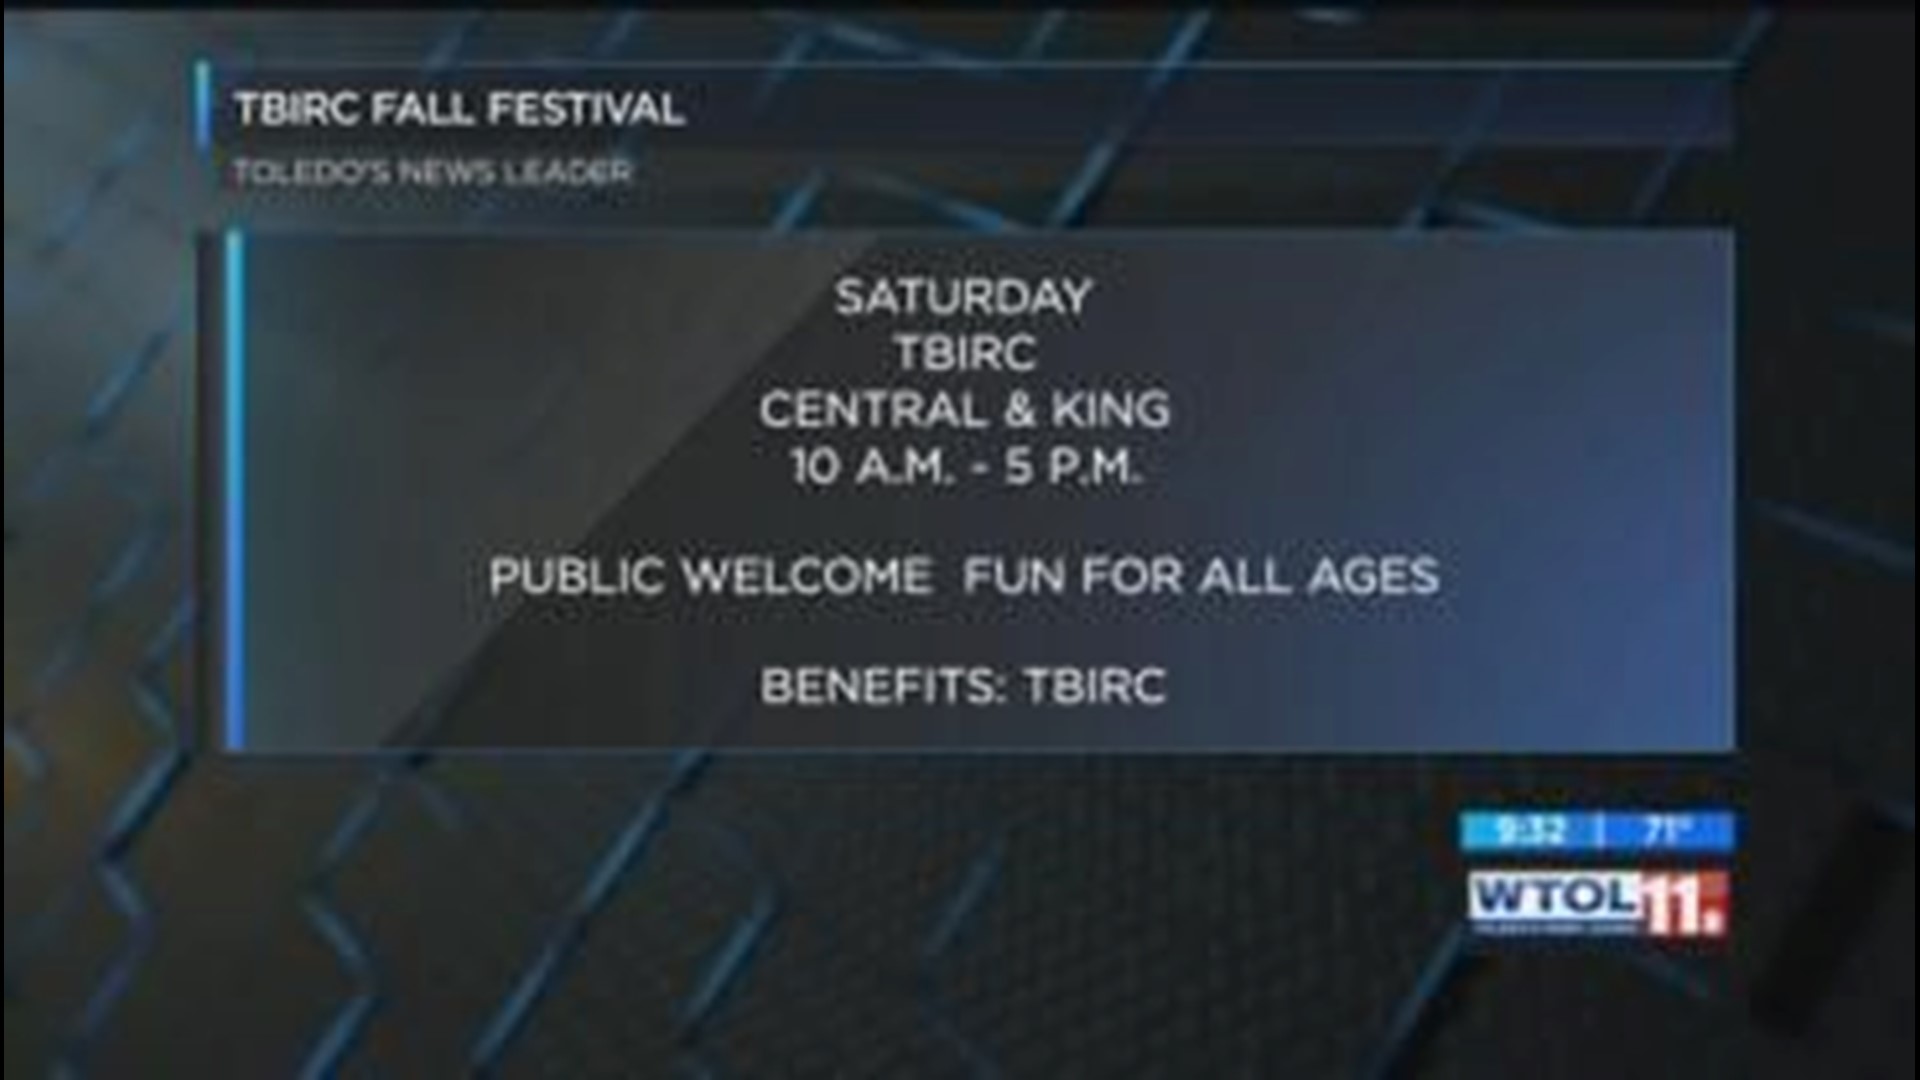 Learn something new at the TBRIC fall festival